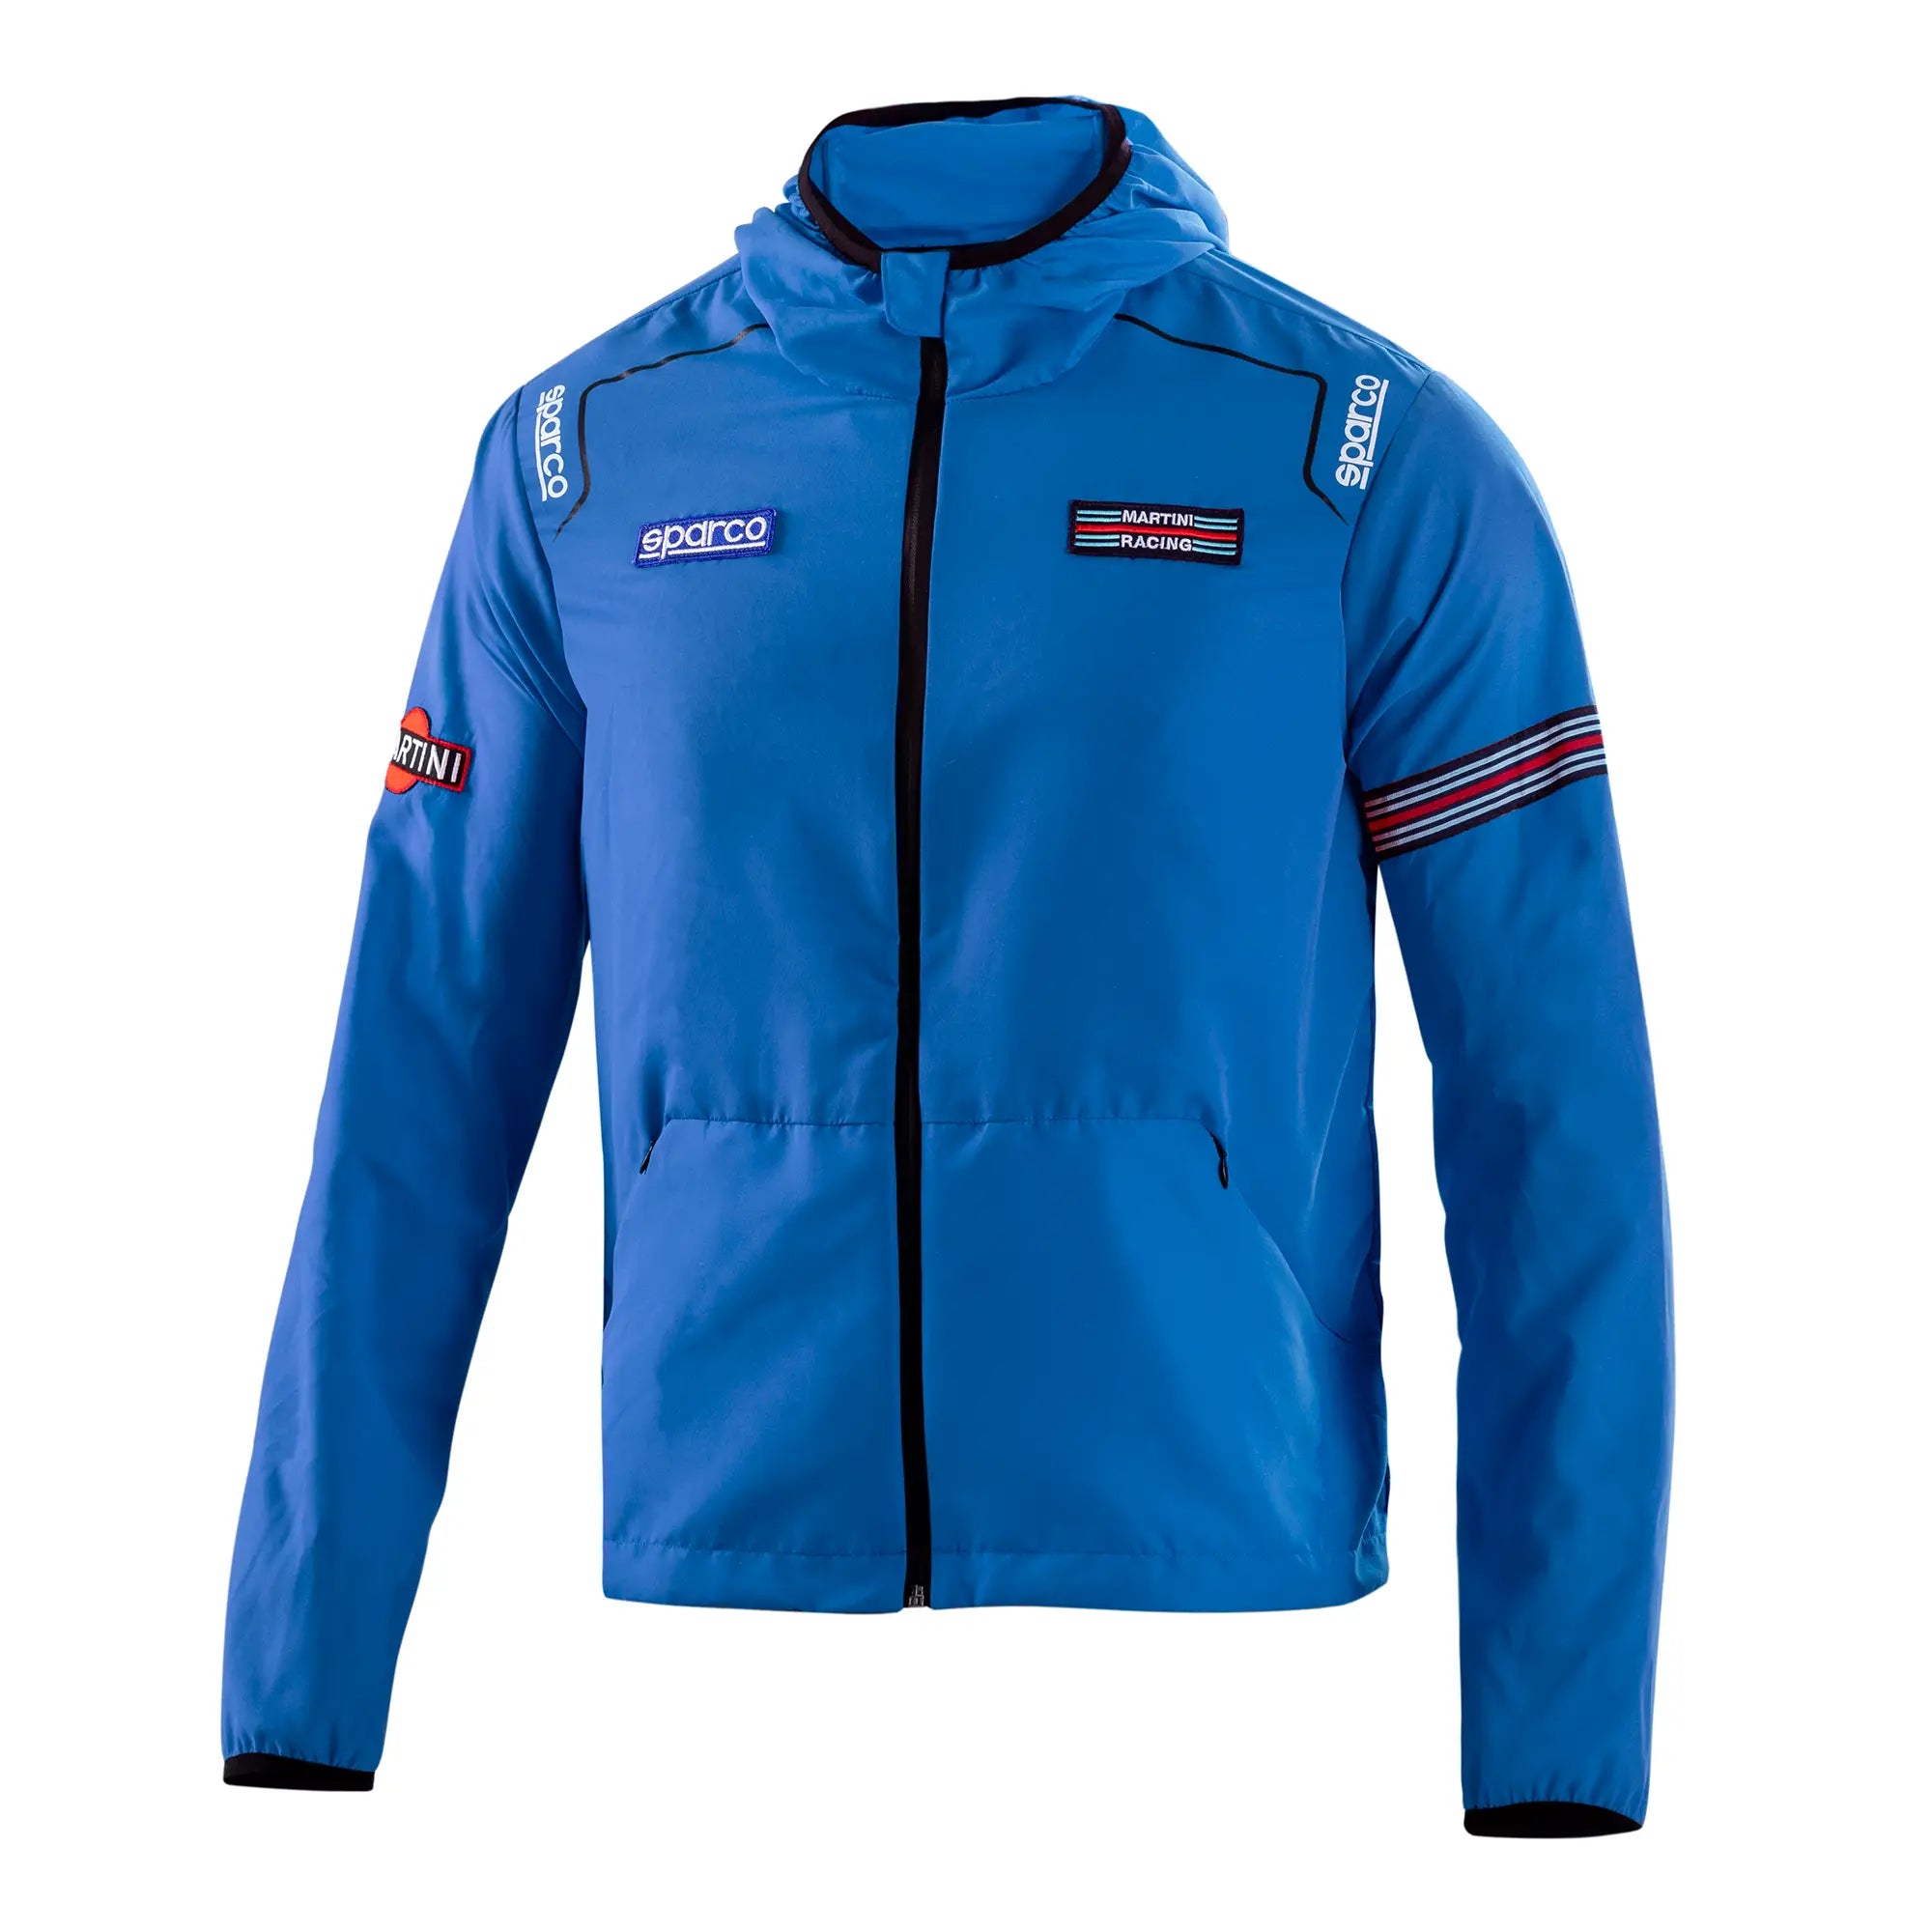 WINDSTOPPER MARTINI RACING - Sparco Shop